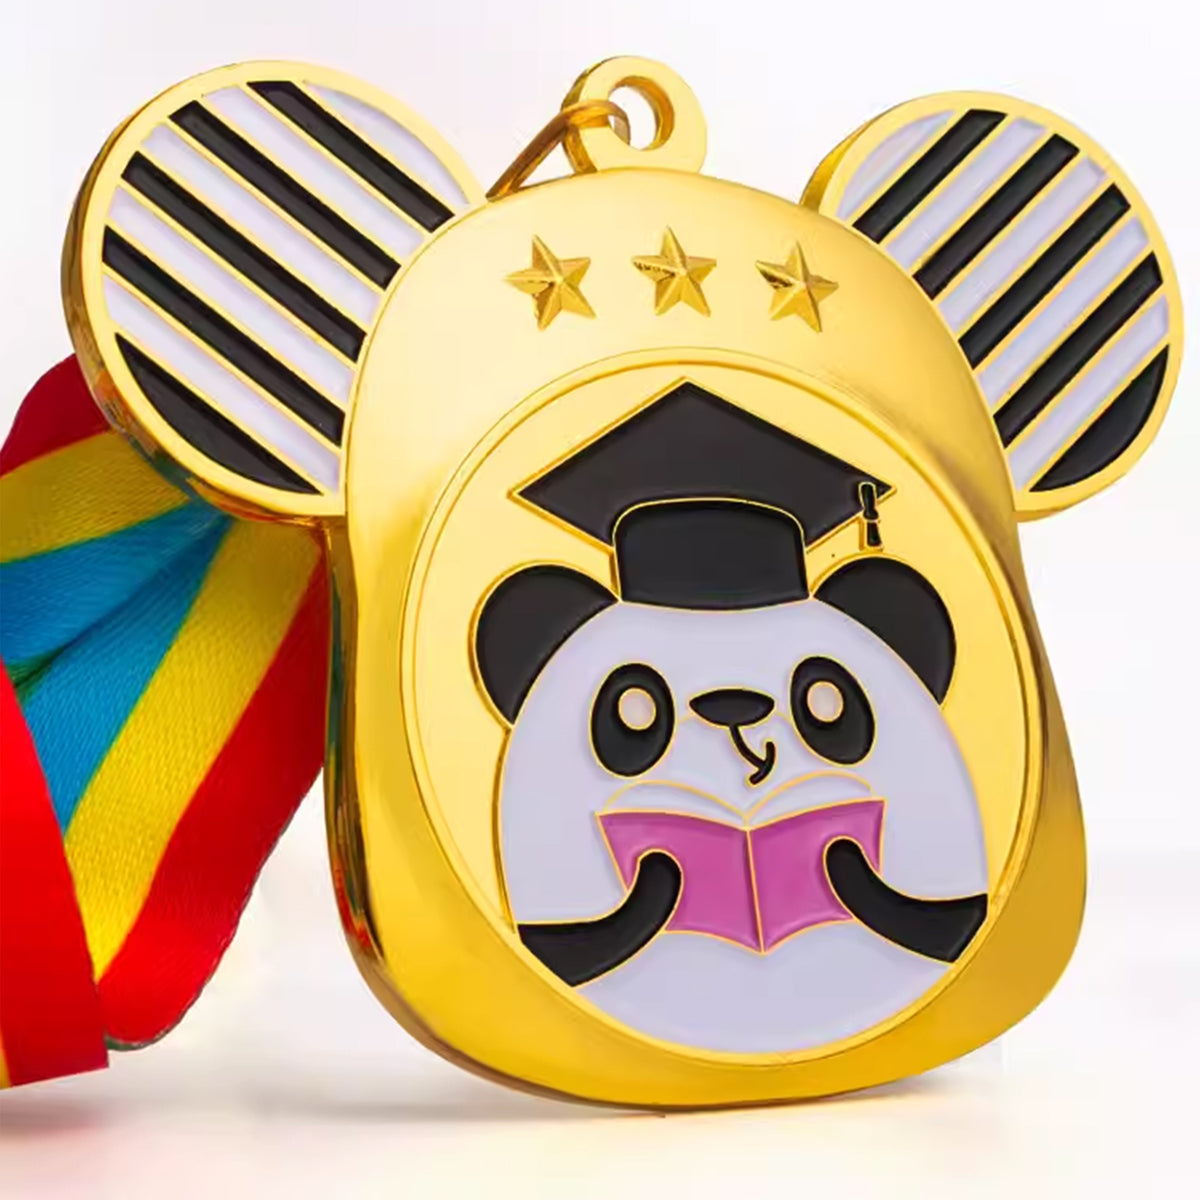 Creative Children And Youth Medals | 熊貓博士獎牌訂製 運動會掛牌榮譽獎章